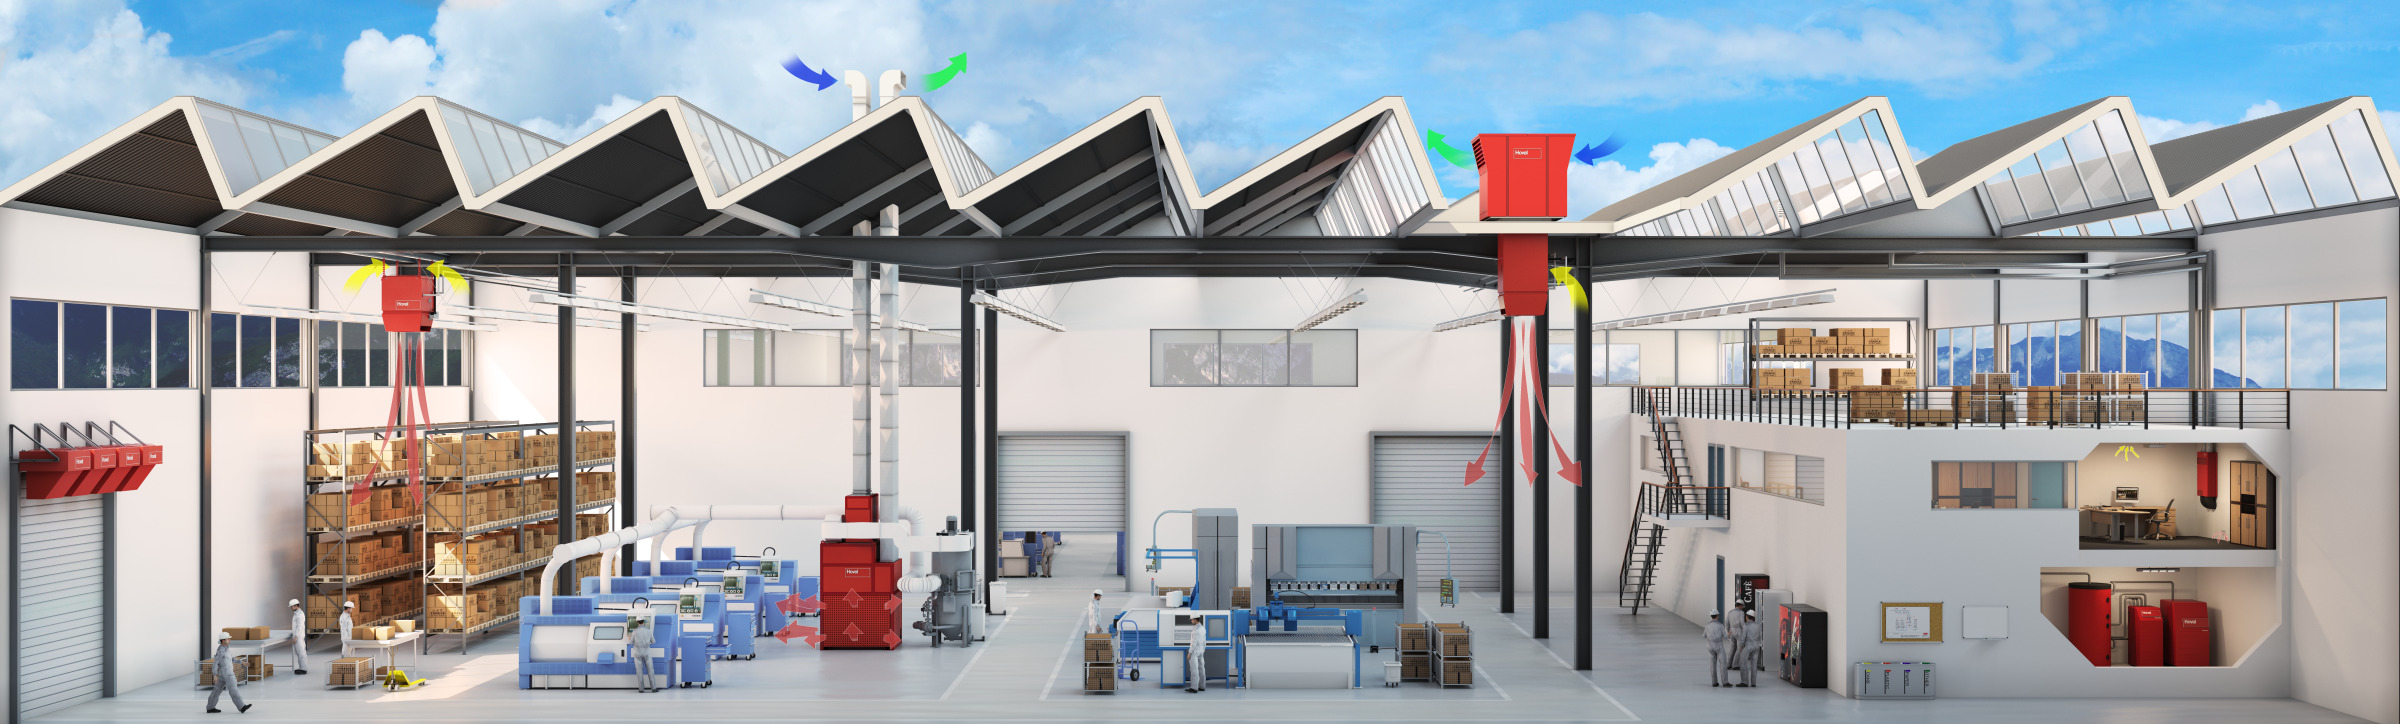 Hoval launches Large Space Heating system for warehouses